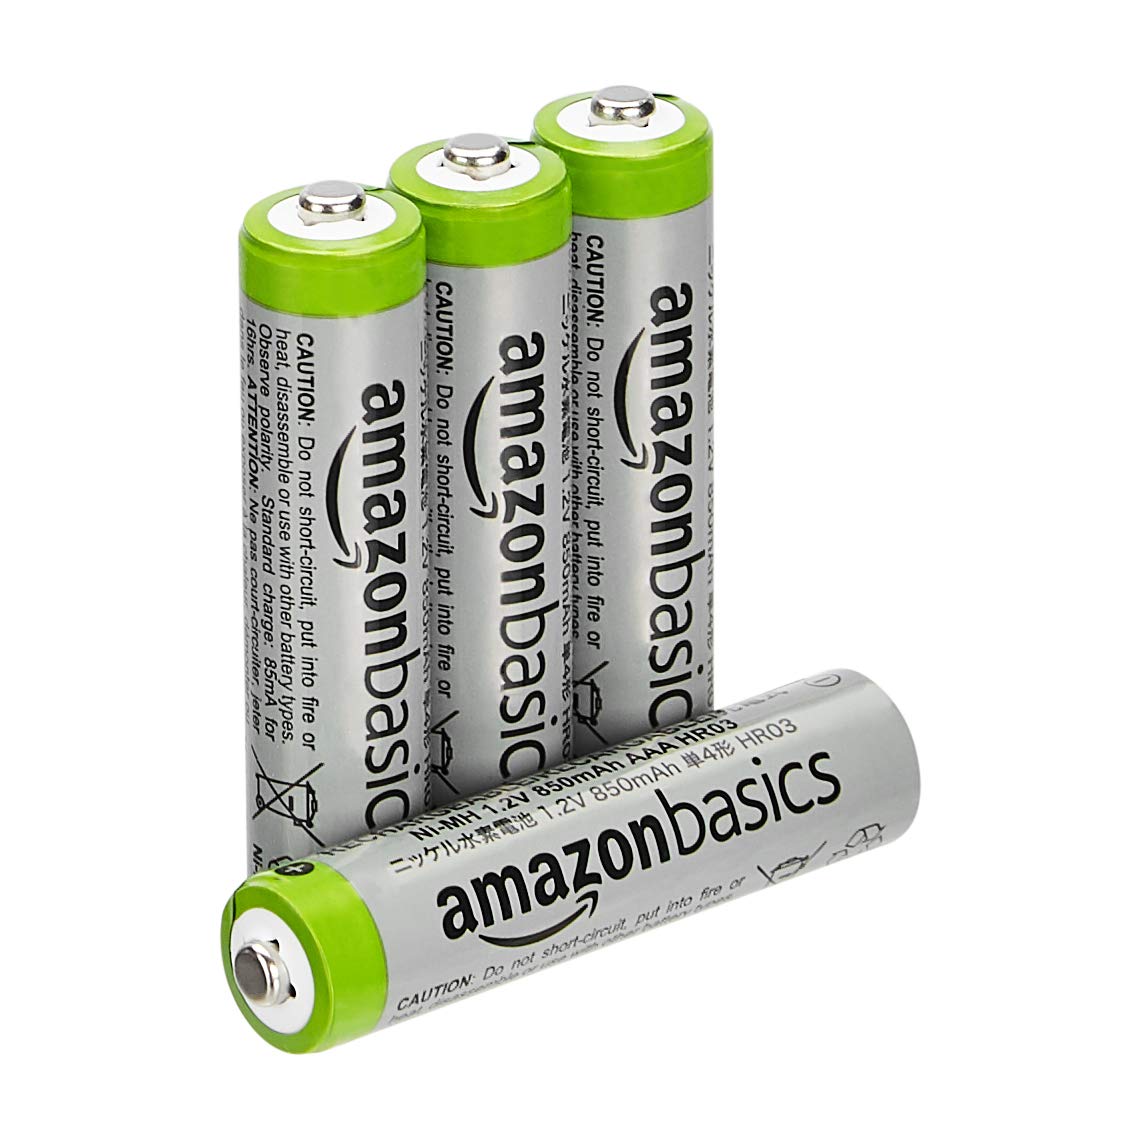 Prime Members: Amazon Basics 4-Pack Rechargeable AAA NiMH High-Capacity 850 mAh Batteries $4.95 w/ S&S + Free Shipping